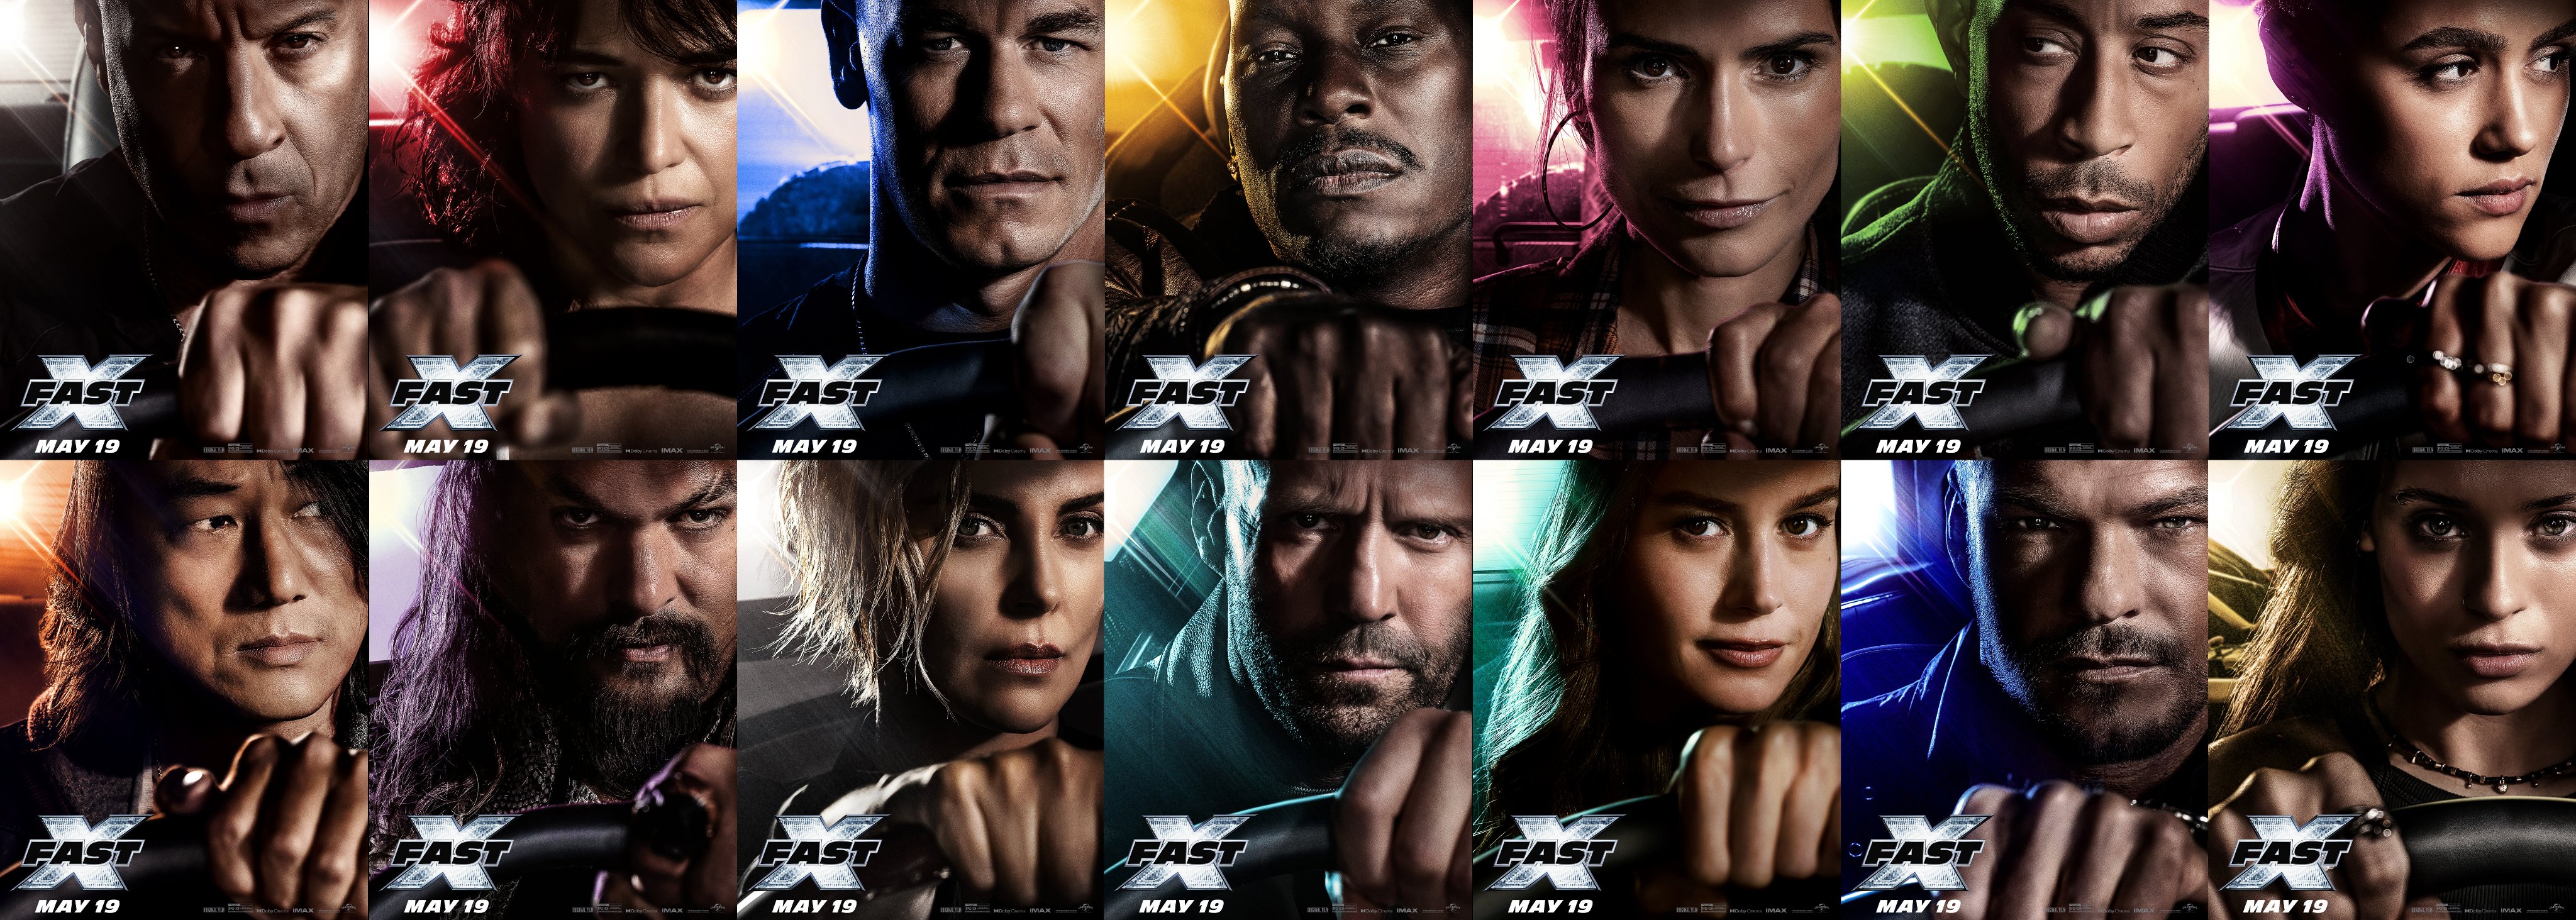 Rotten Tomatoes - All-new character posters for #FASTX